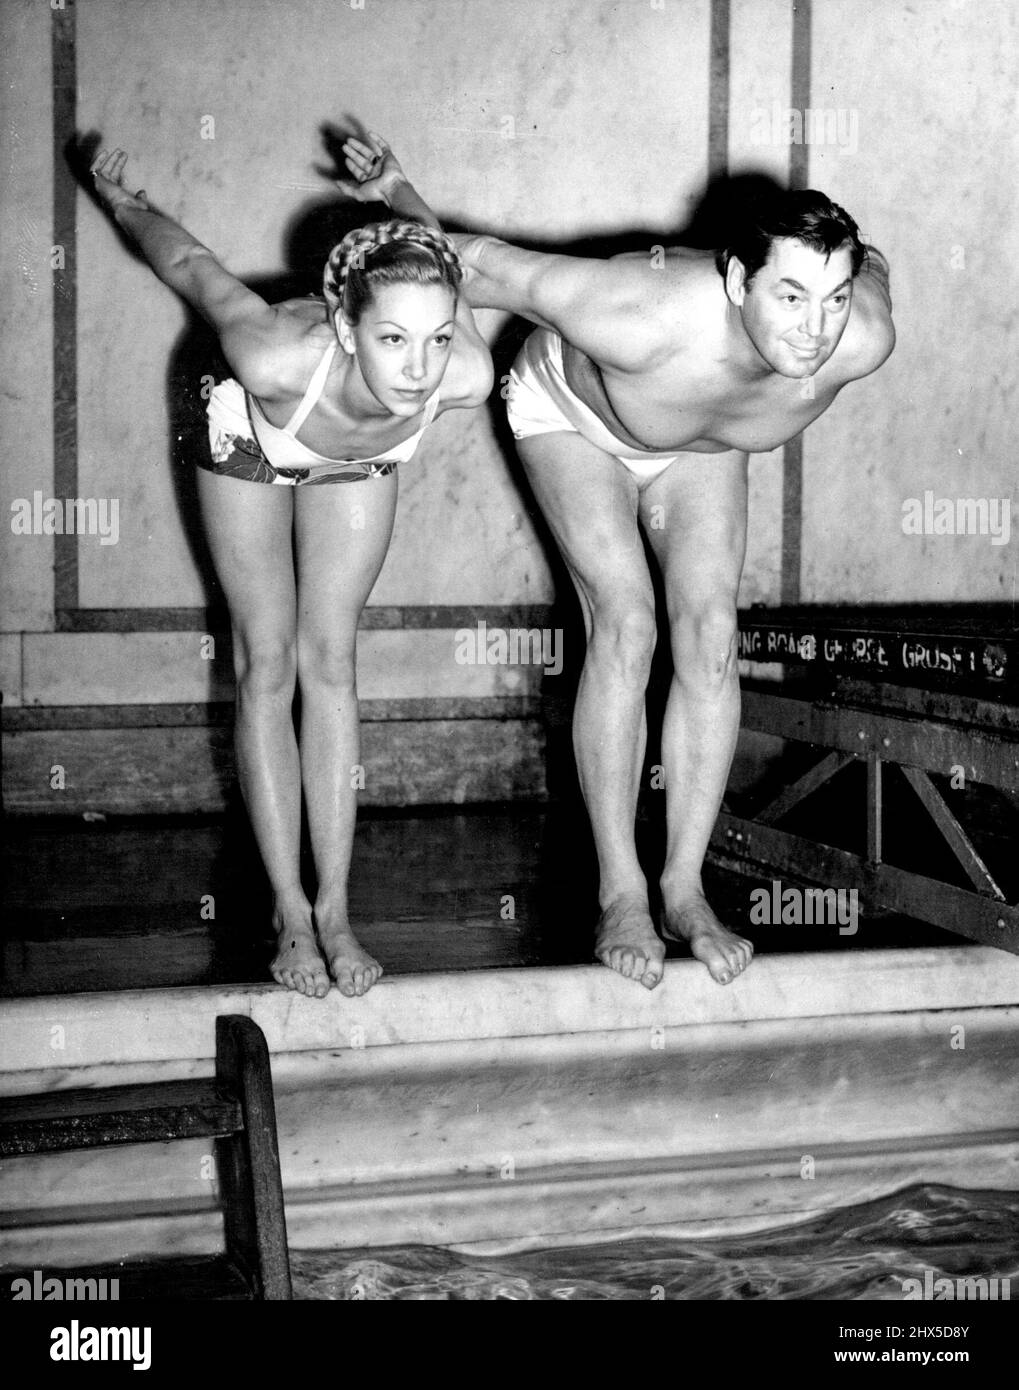 In Time With 'Tarzan' In perfect rhythm 'Tarzan' and his 'Mate'-screen stars Johnny Weismuller and Belita go off the pool-side together, as they rehearse in London to-day, (Monday), for their forthcoming roles in the Aqua show at Earls Court. February 16, 1948. Stock Photo